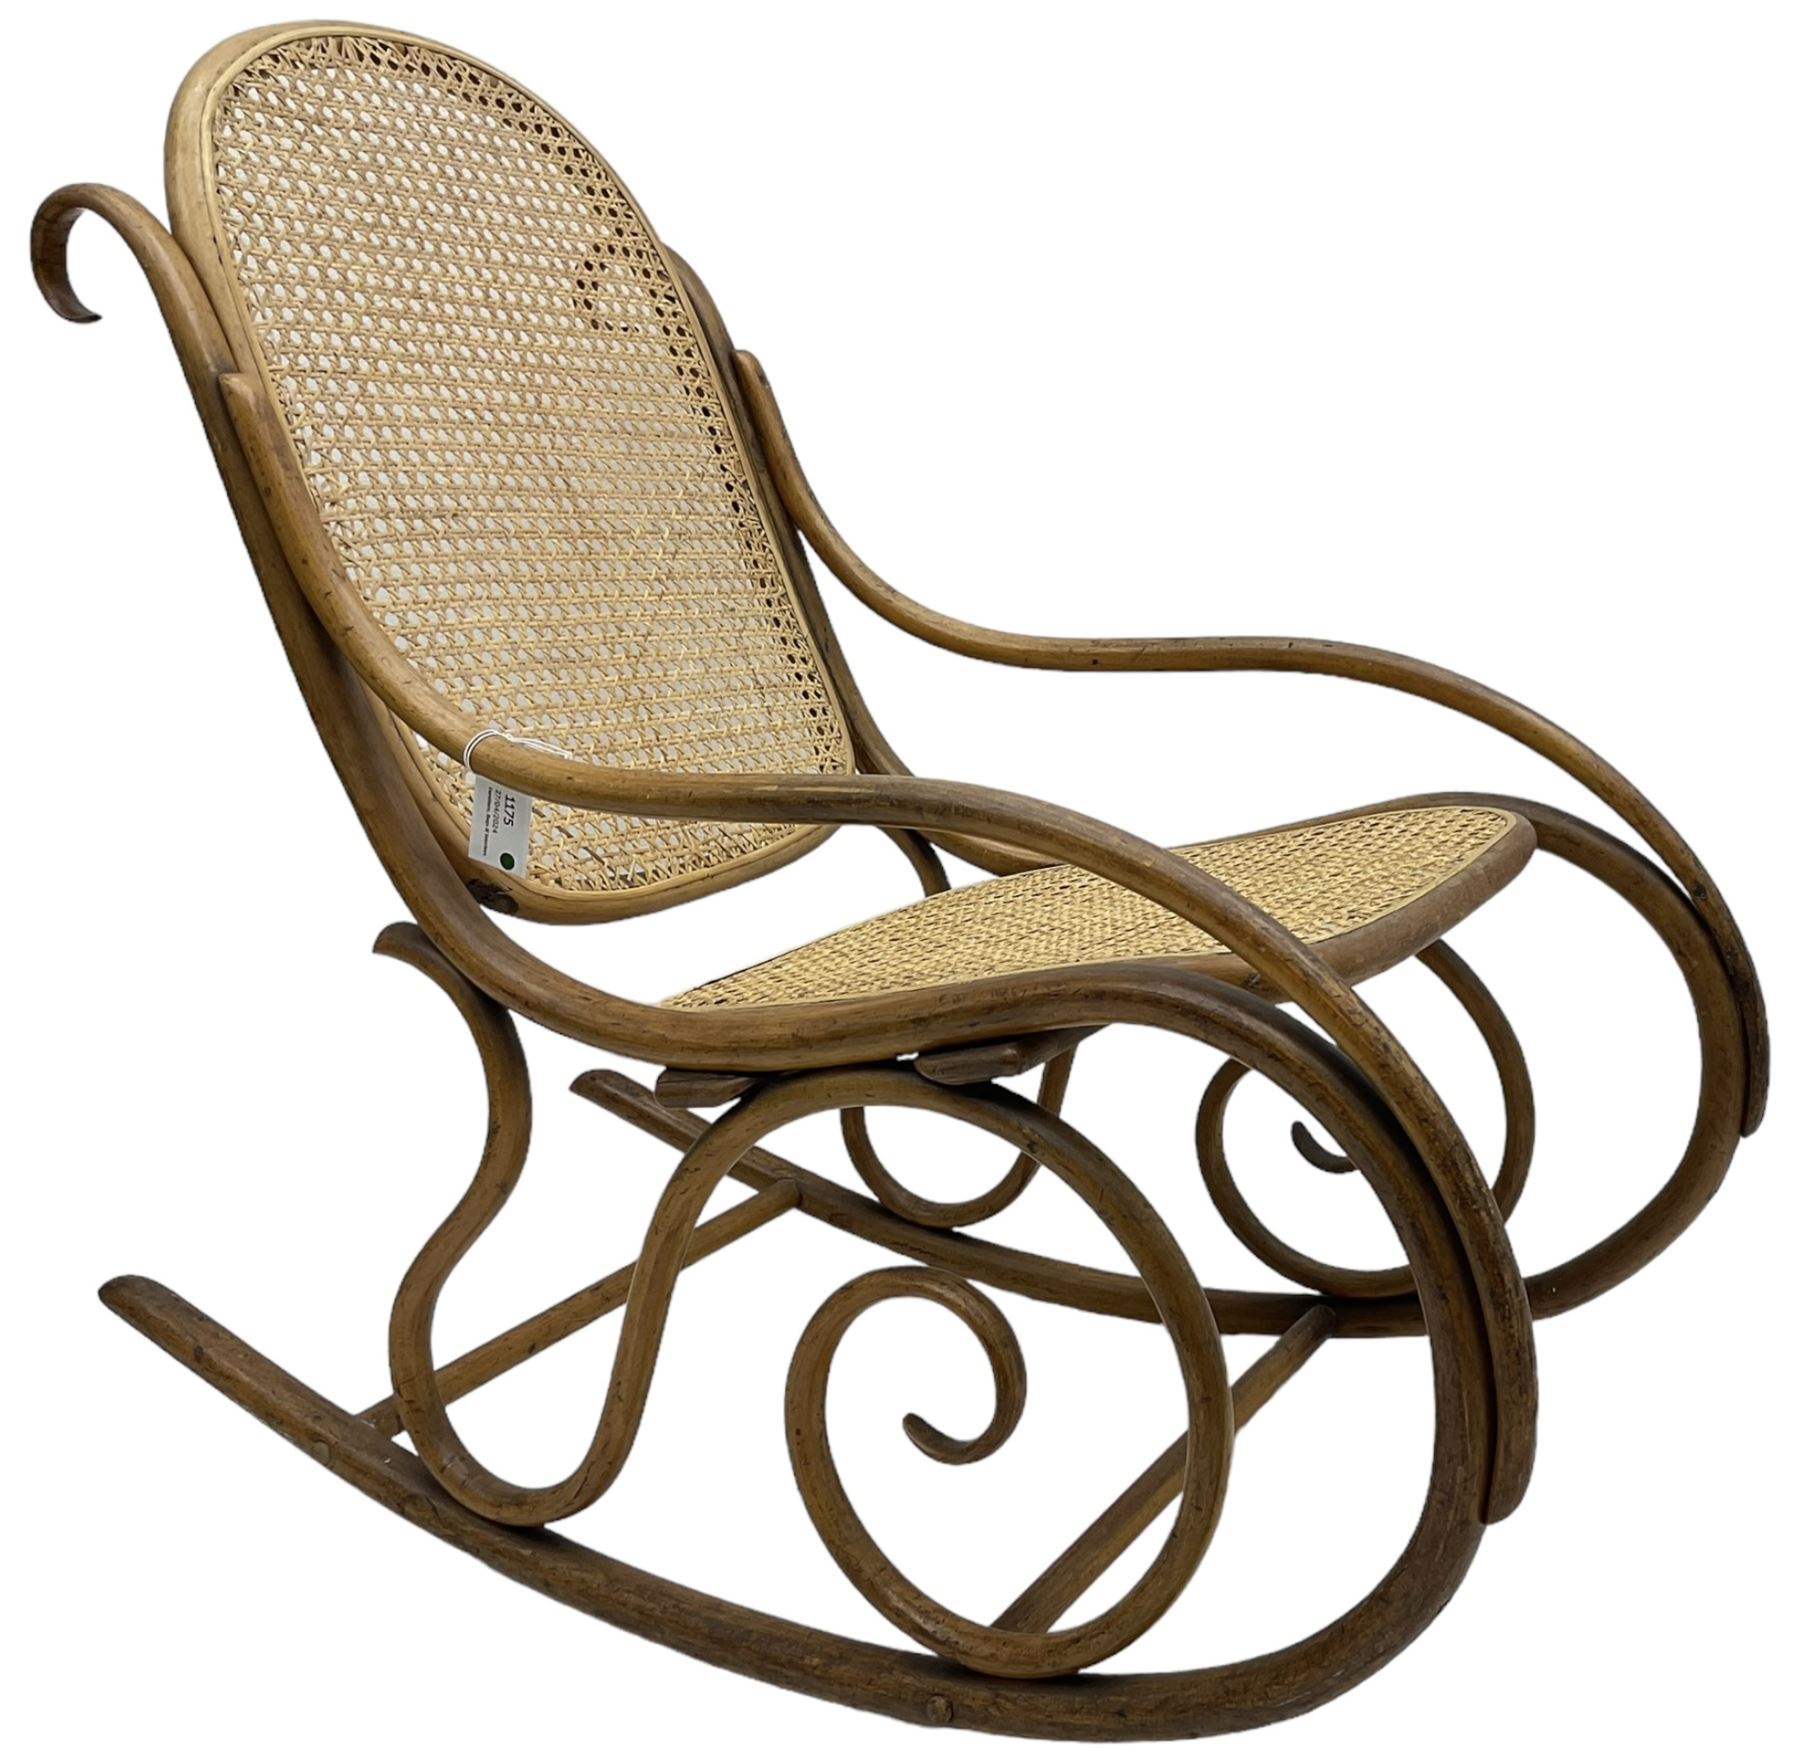 Early 20th century Michael Thonet design bentwood rocking chair - Image 6 of 7